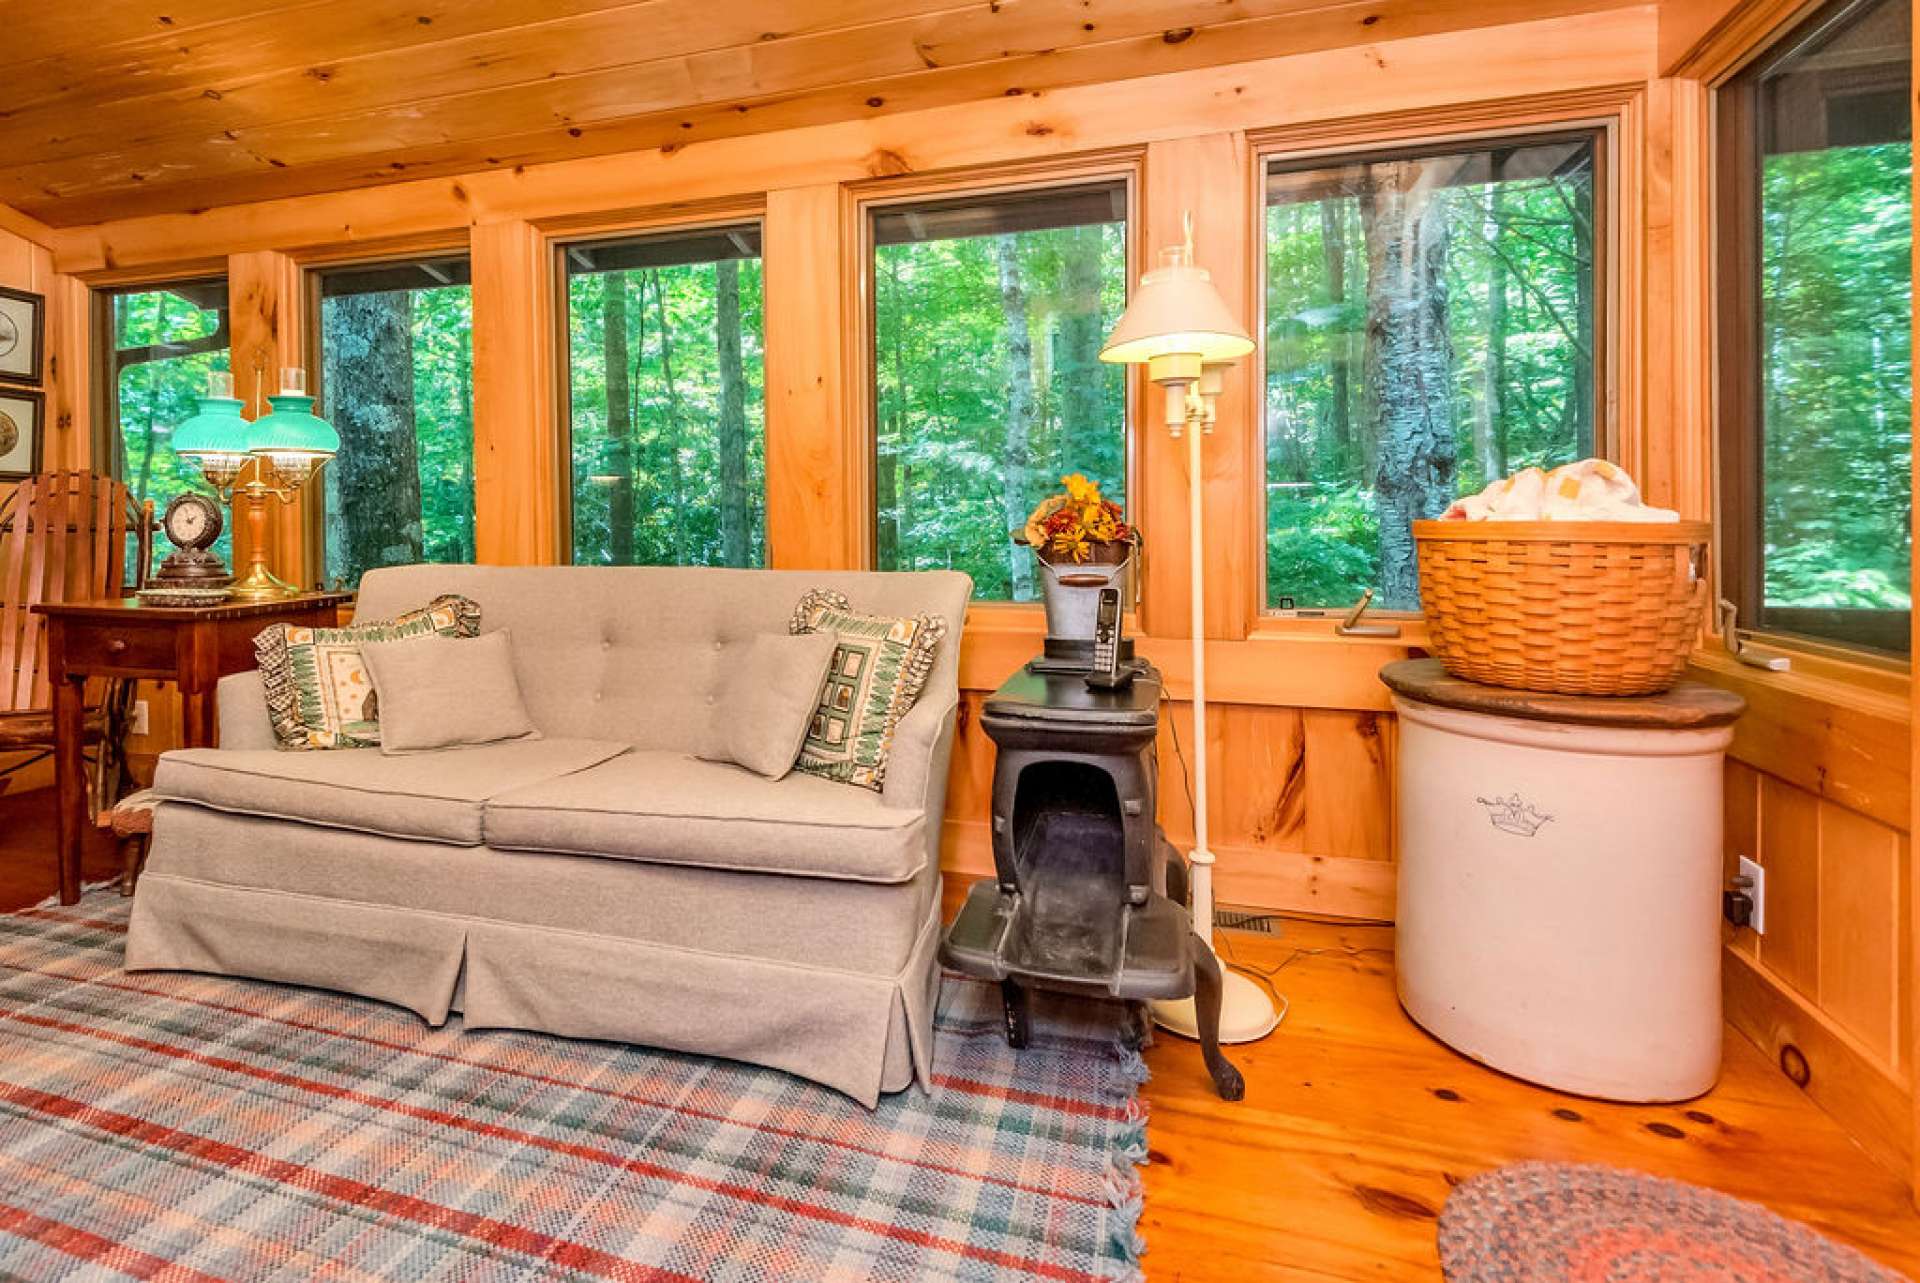 The den with creek views offers the music of nature when the windows are open.